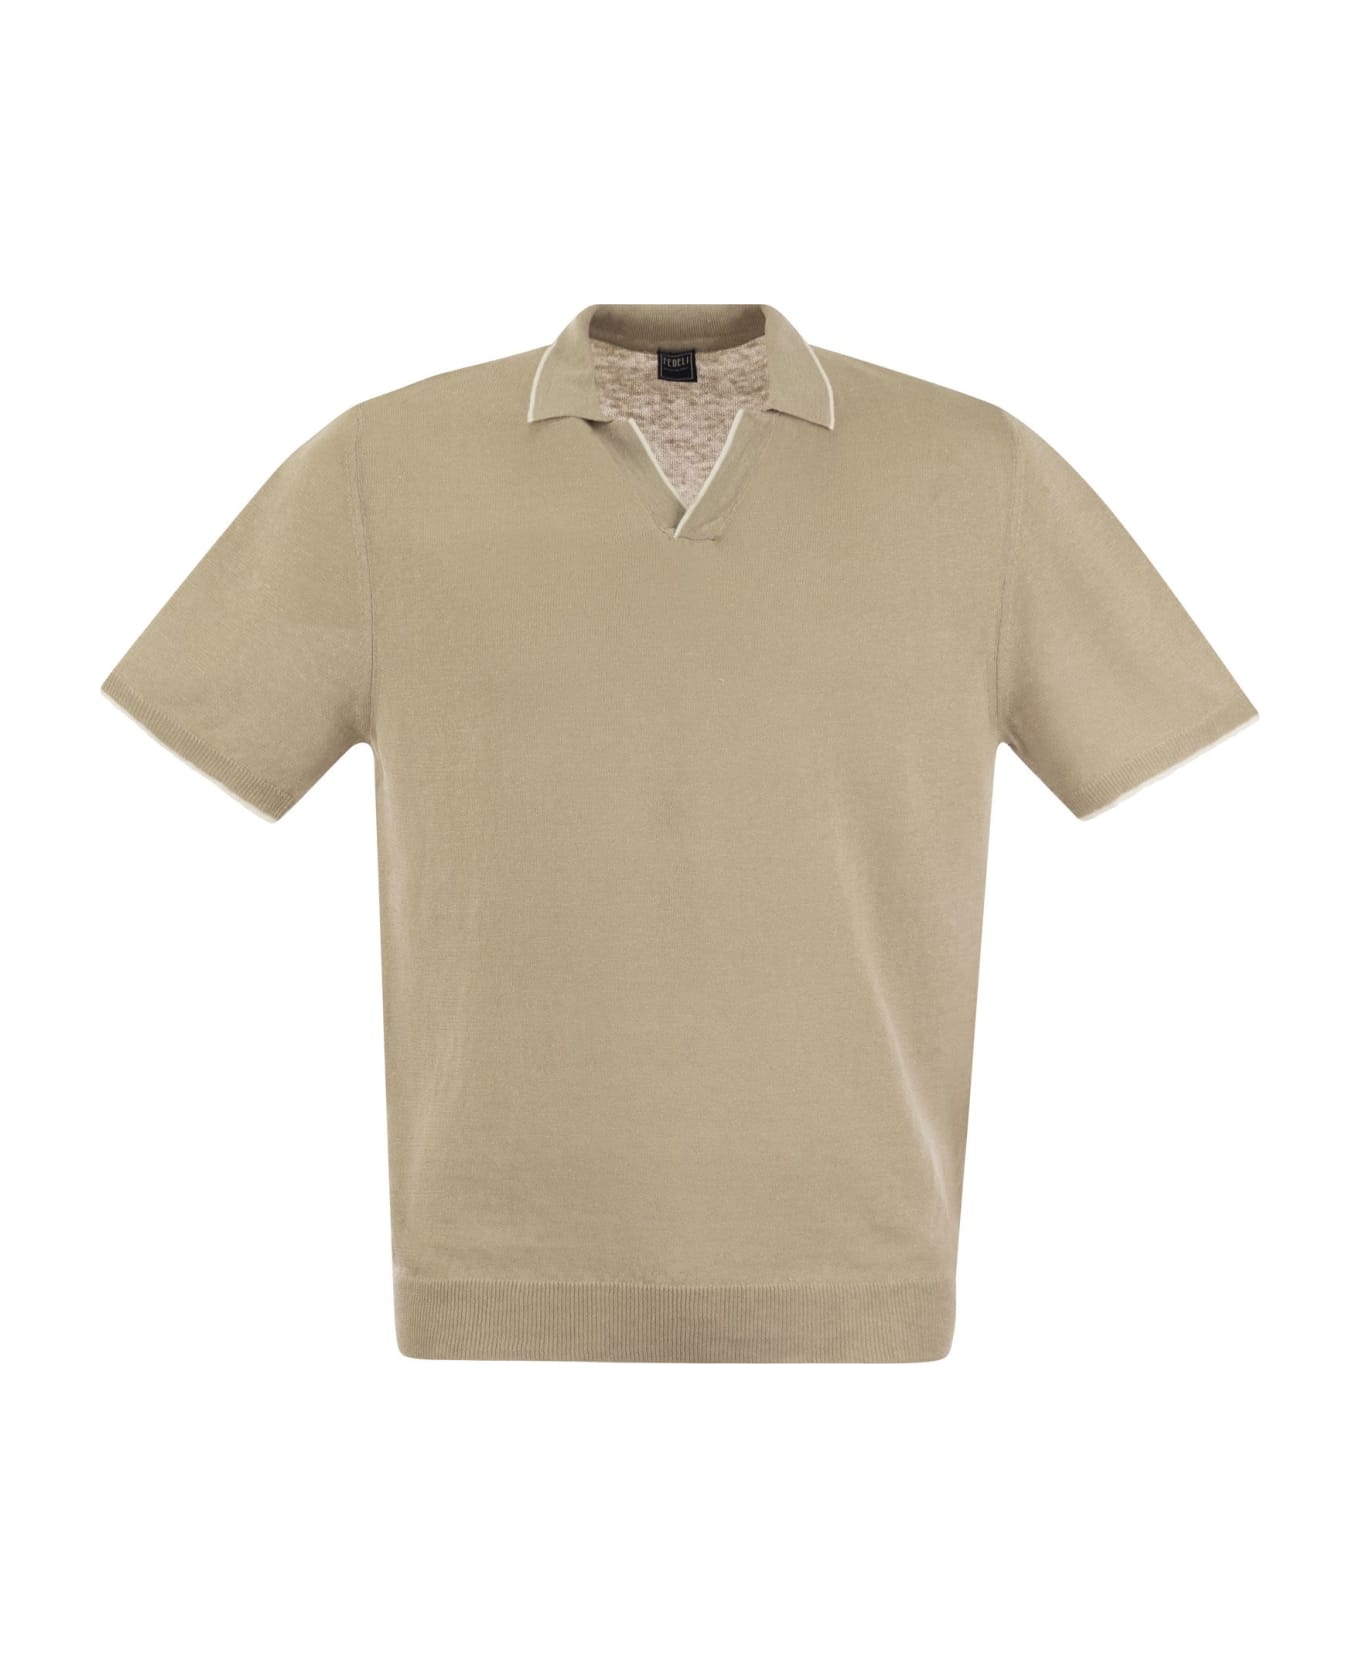 Fedeli Polo Shirt With Open Collar In Linen And Cotton - Beige